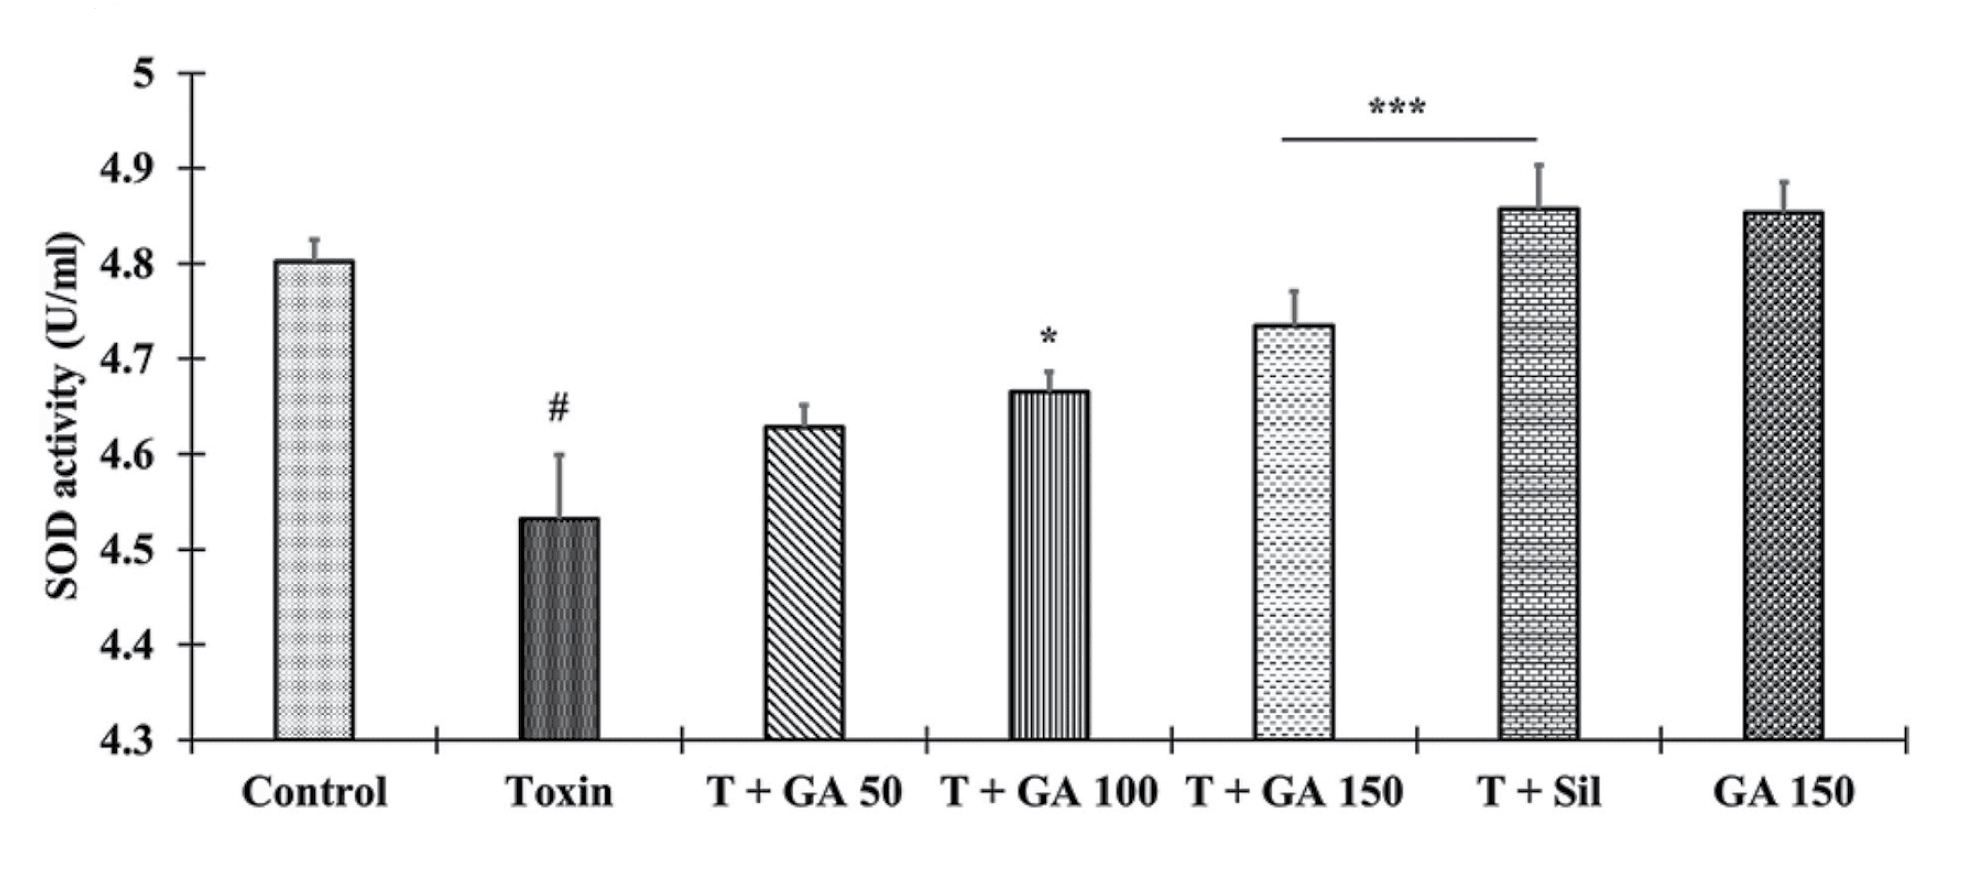 Effect of gallic acid on oxidative stress. Liver endogenous antioxidant levels of SOD. The SOD enzyme activity was estimated using Amplite Colorimetric Superoxide Dismutase Assay Kit (Cat no 11305, AAT Bioquest, Inc., USA). Data are shown as mean ± SEM (n = 6/group). Statistical analysis was performed using one-way ANOVA followed by Tukey-Kramer multiple comparisons test. #Significantly different from control group (P < 0.001), *Significantly different from toxin group (p < 0.05), **Significantly different from toxin group (p < 0.01), ***Significantly different from toxin group (p < 0.001). Toxin group- isoniazid and rifampicin group, GA 50 + T- Gallic acid (50 mg/kg) + toxin, GA 100 + T- Gallic acid (100 mg/kg) + toxin, GA 150 + T- Gallic acid (150 mg/kg) + toxin, Sil + T- Silymarin (100 mg/kg) + toxin. Source: <b>Gallic acid attenuates isoniazid and rifampicin-induced liver injury by improving hepatic redox homeostasis through influence on Nrf2 and NF-κB signalling cascades in Wistar Rats</b> by Sukumaran Sanjay, Chandrashekaran Girish, Pampa Ch Toi, Zachariah Bobby. <em>Journal of Pharmacy and Pharmacology</em>, April 2021